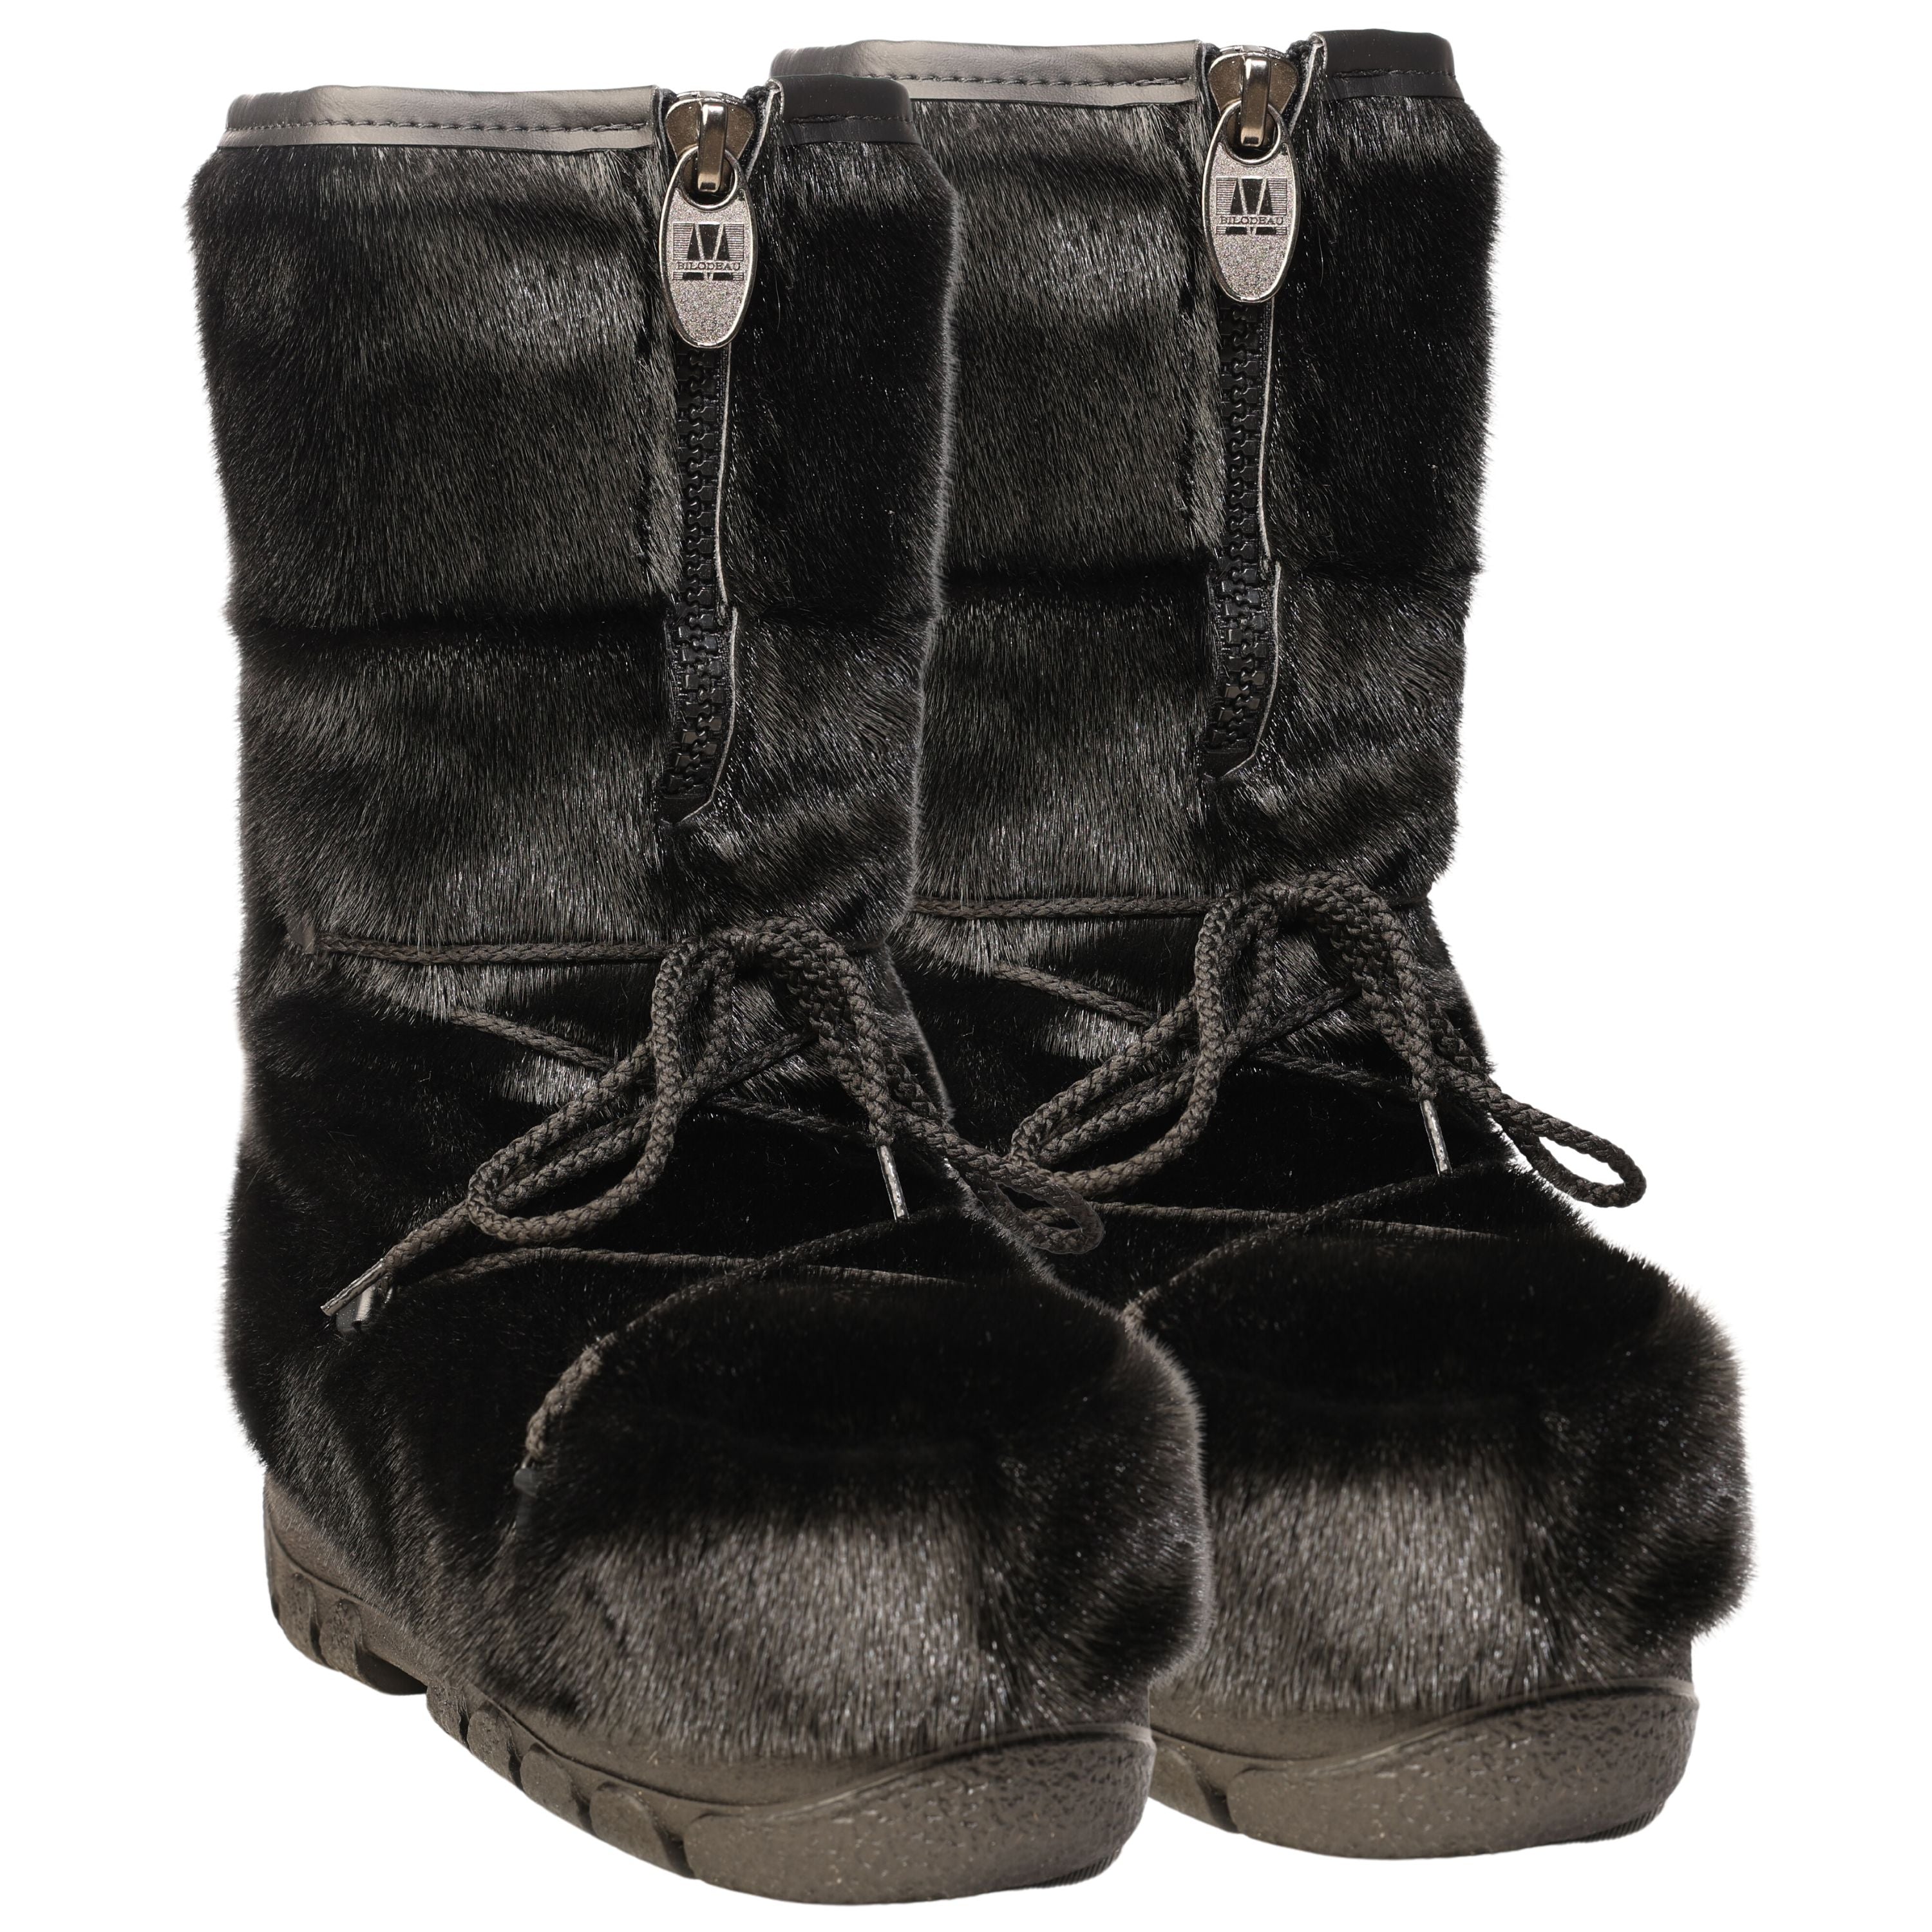 "Checked style" Seal fur boots - Women's